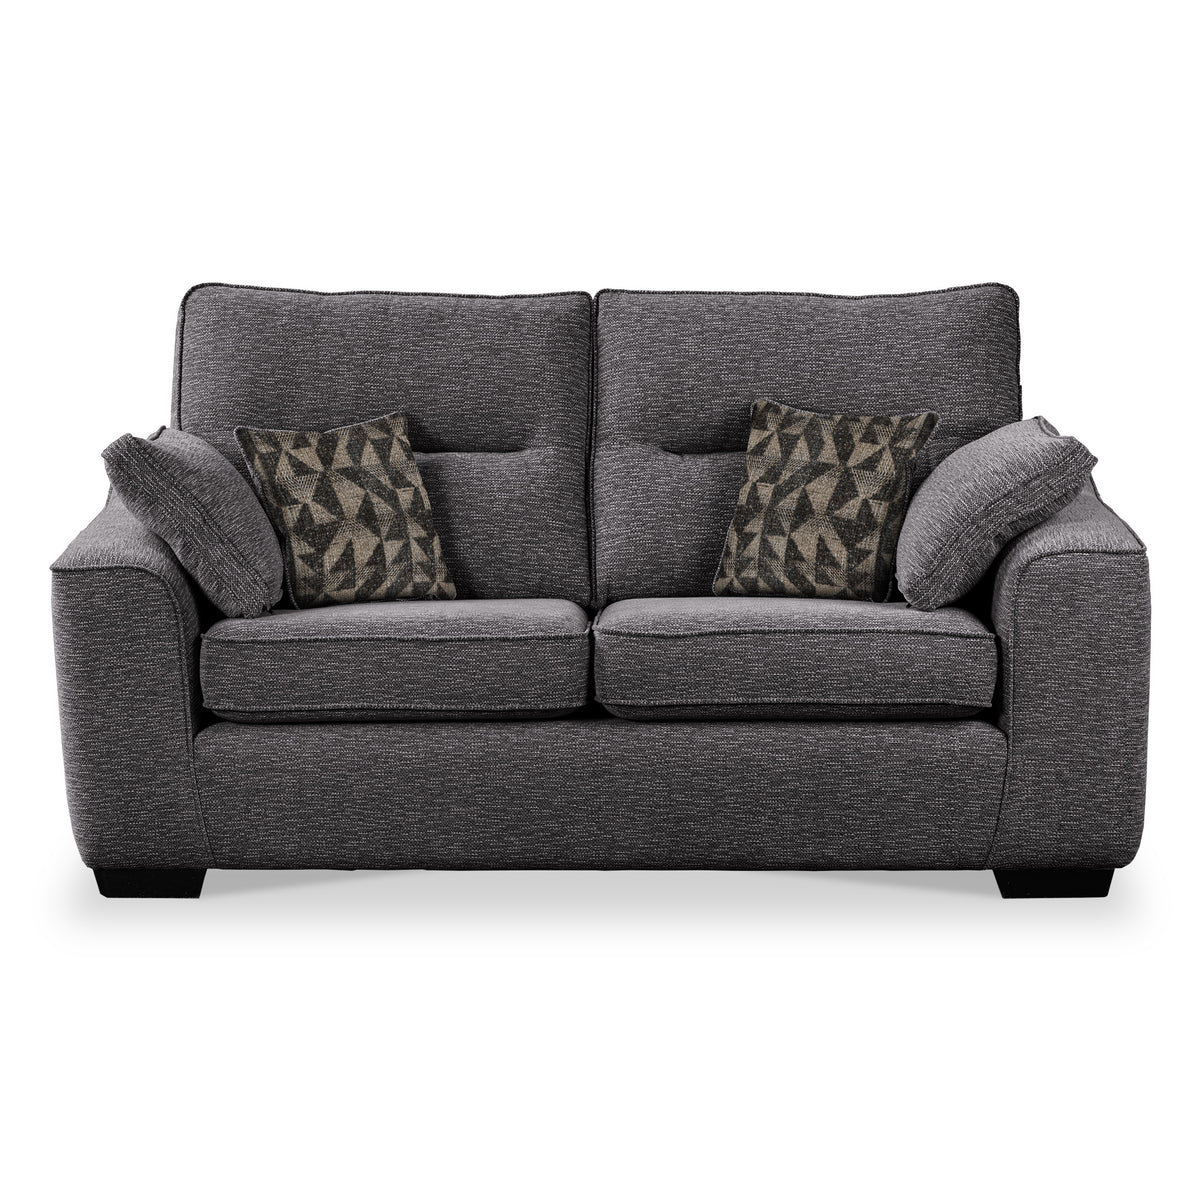 Sudbury Charcoal 2 Seater Sofabed with Charcoal Scatter Cushions